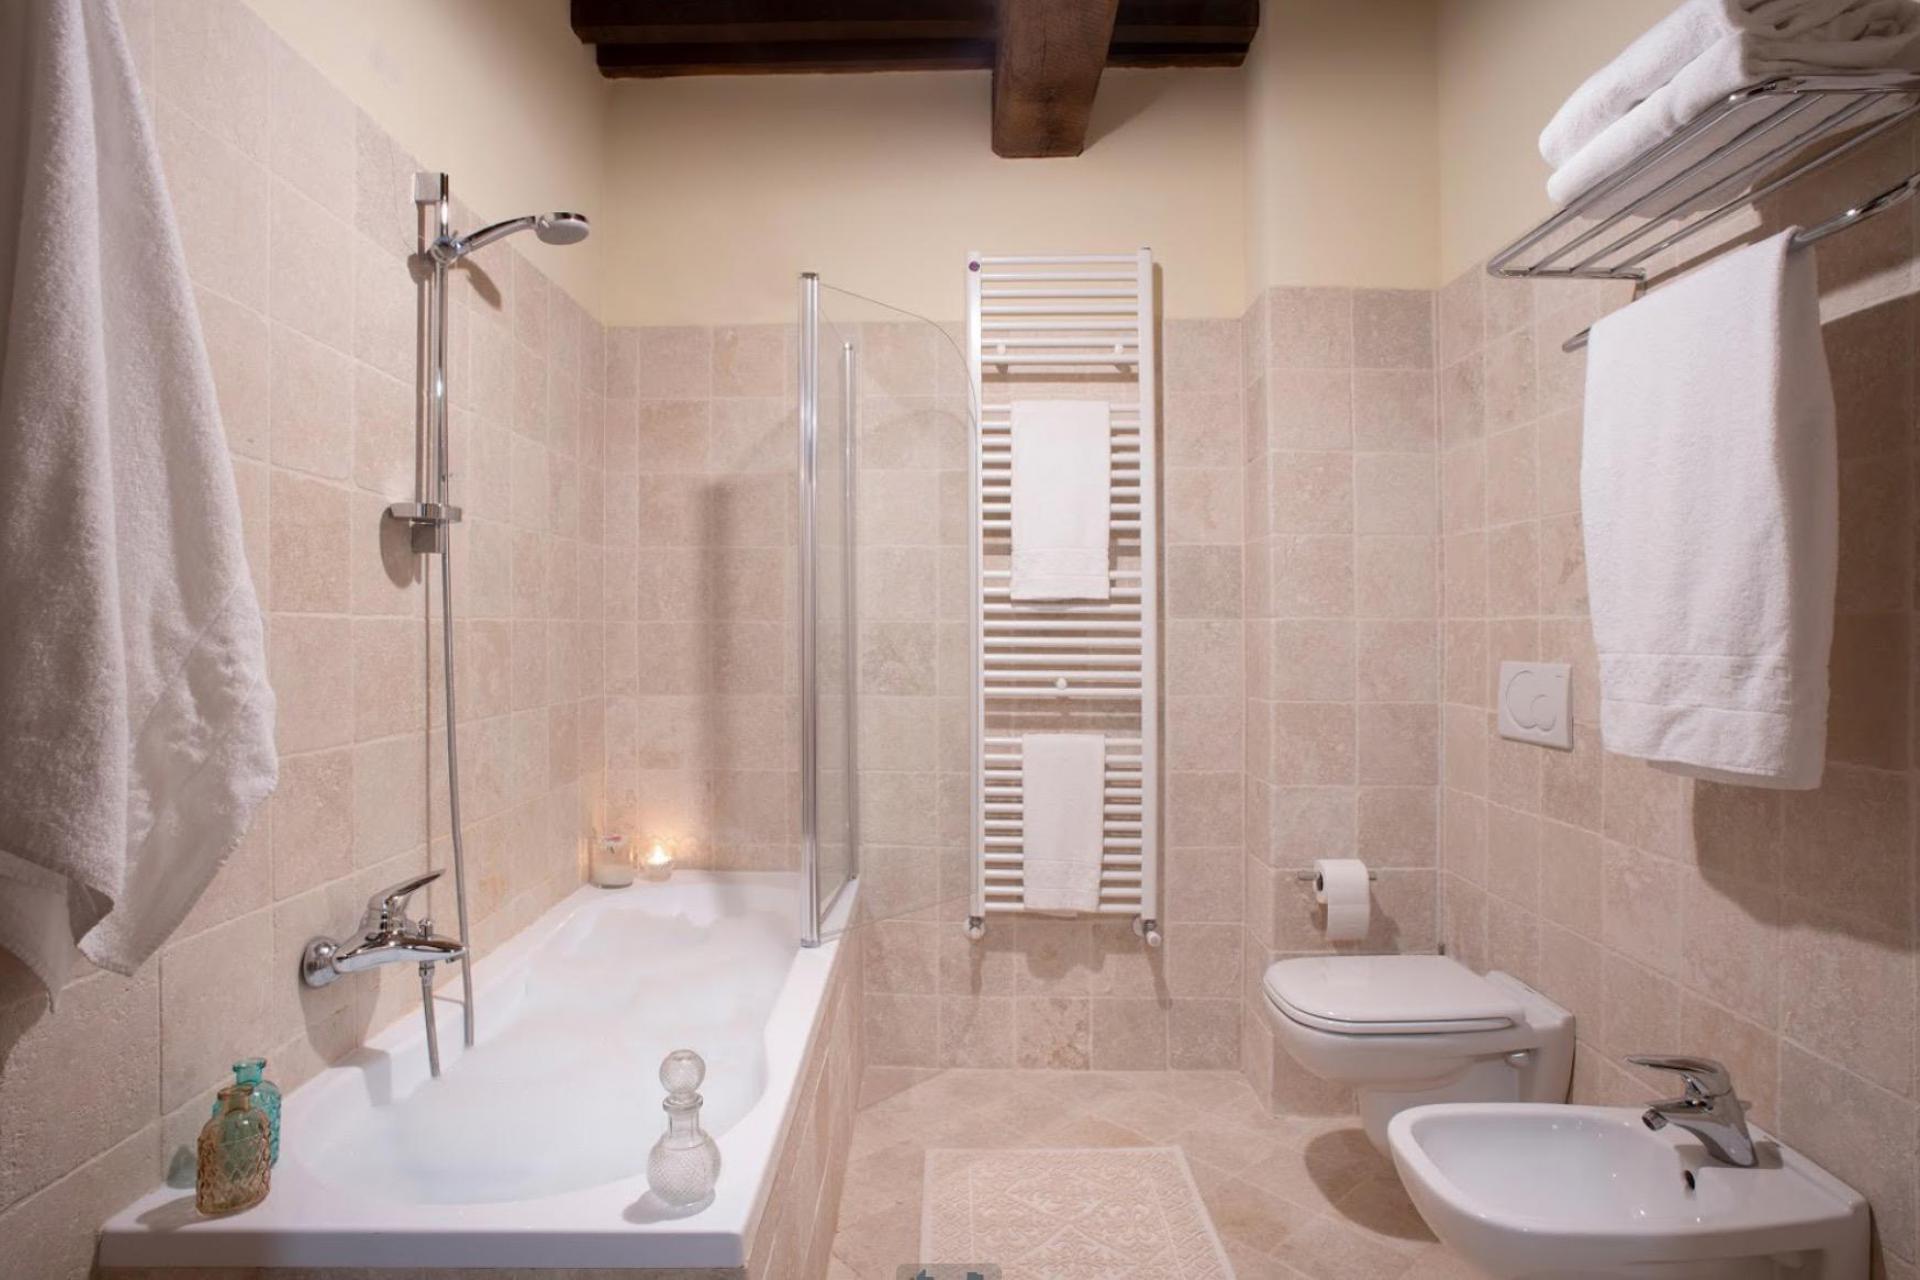 Agriturismo Umbria Family-friendly resort in the heart of Umbria